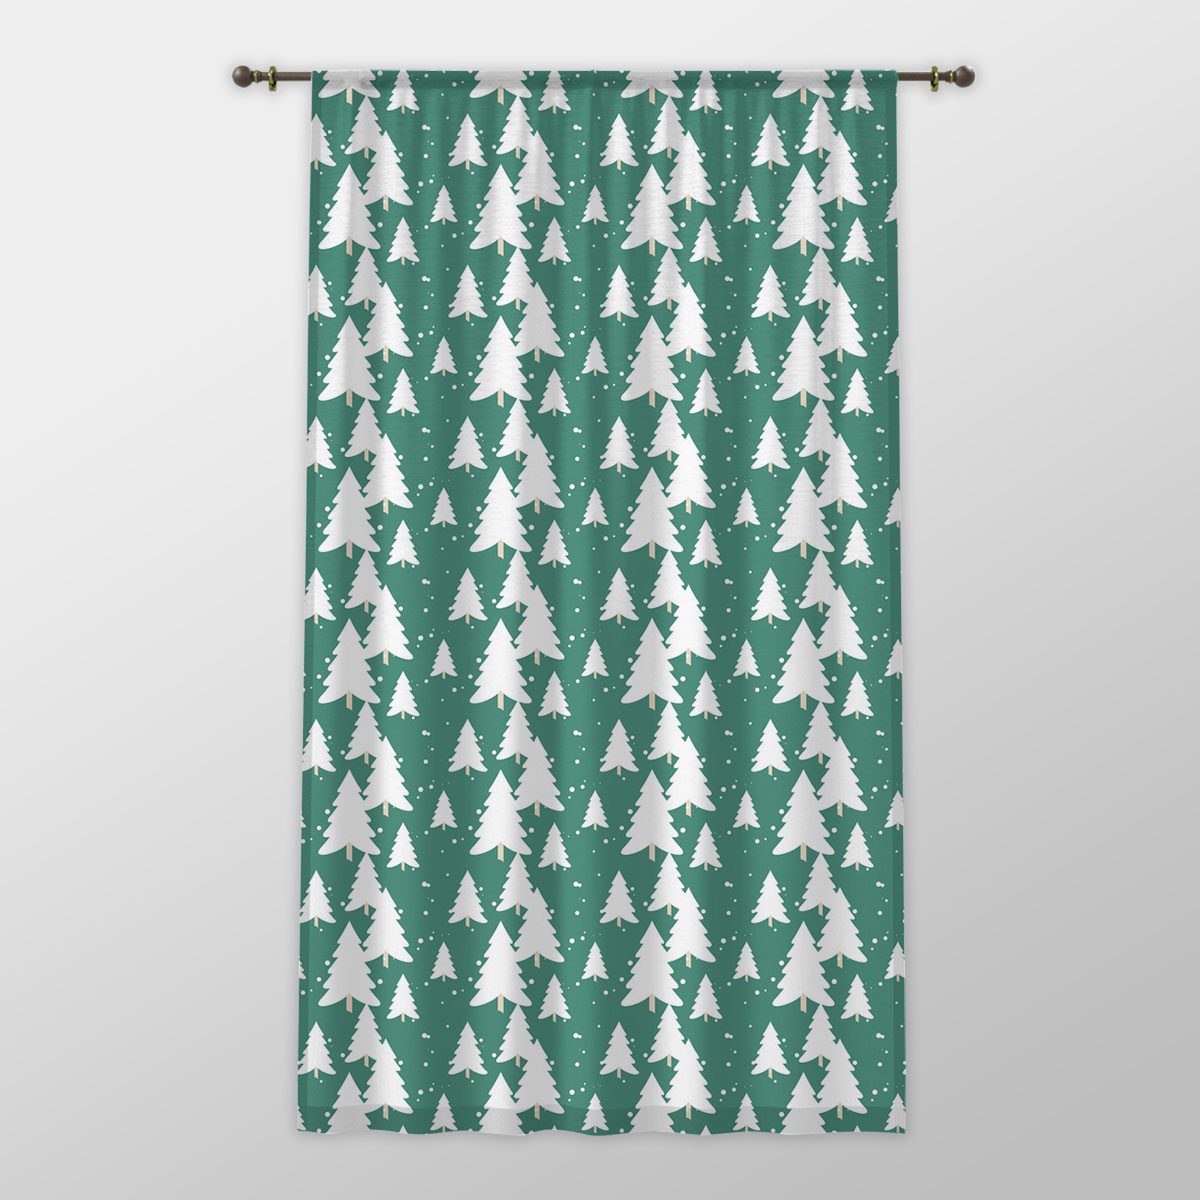 Green And White Christmas Tree One-side Printed Window Curtain